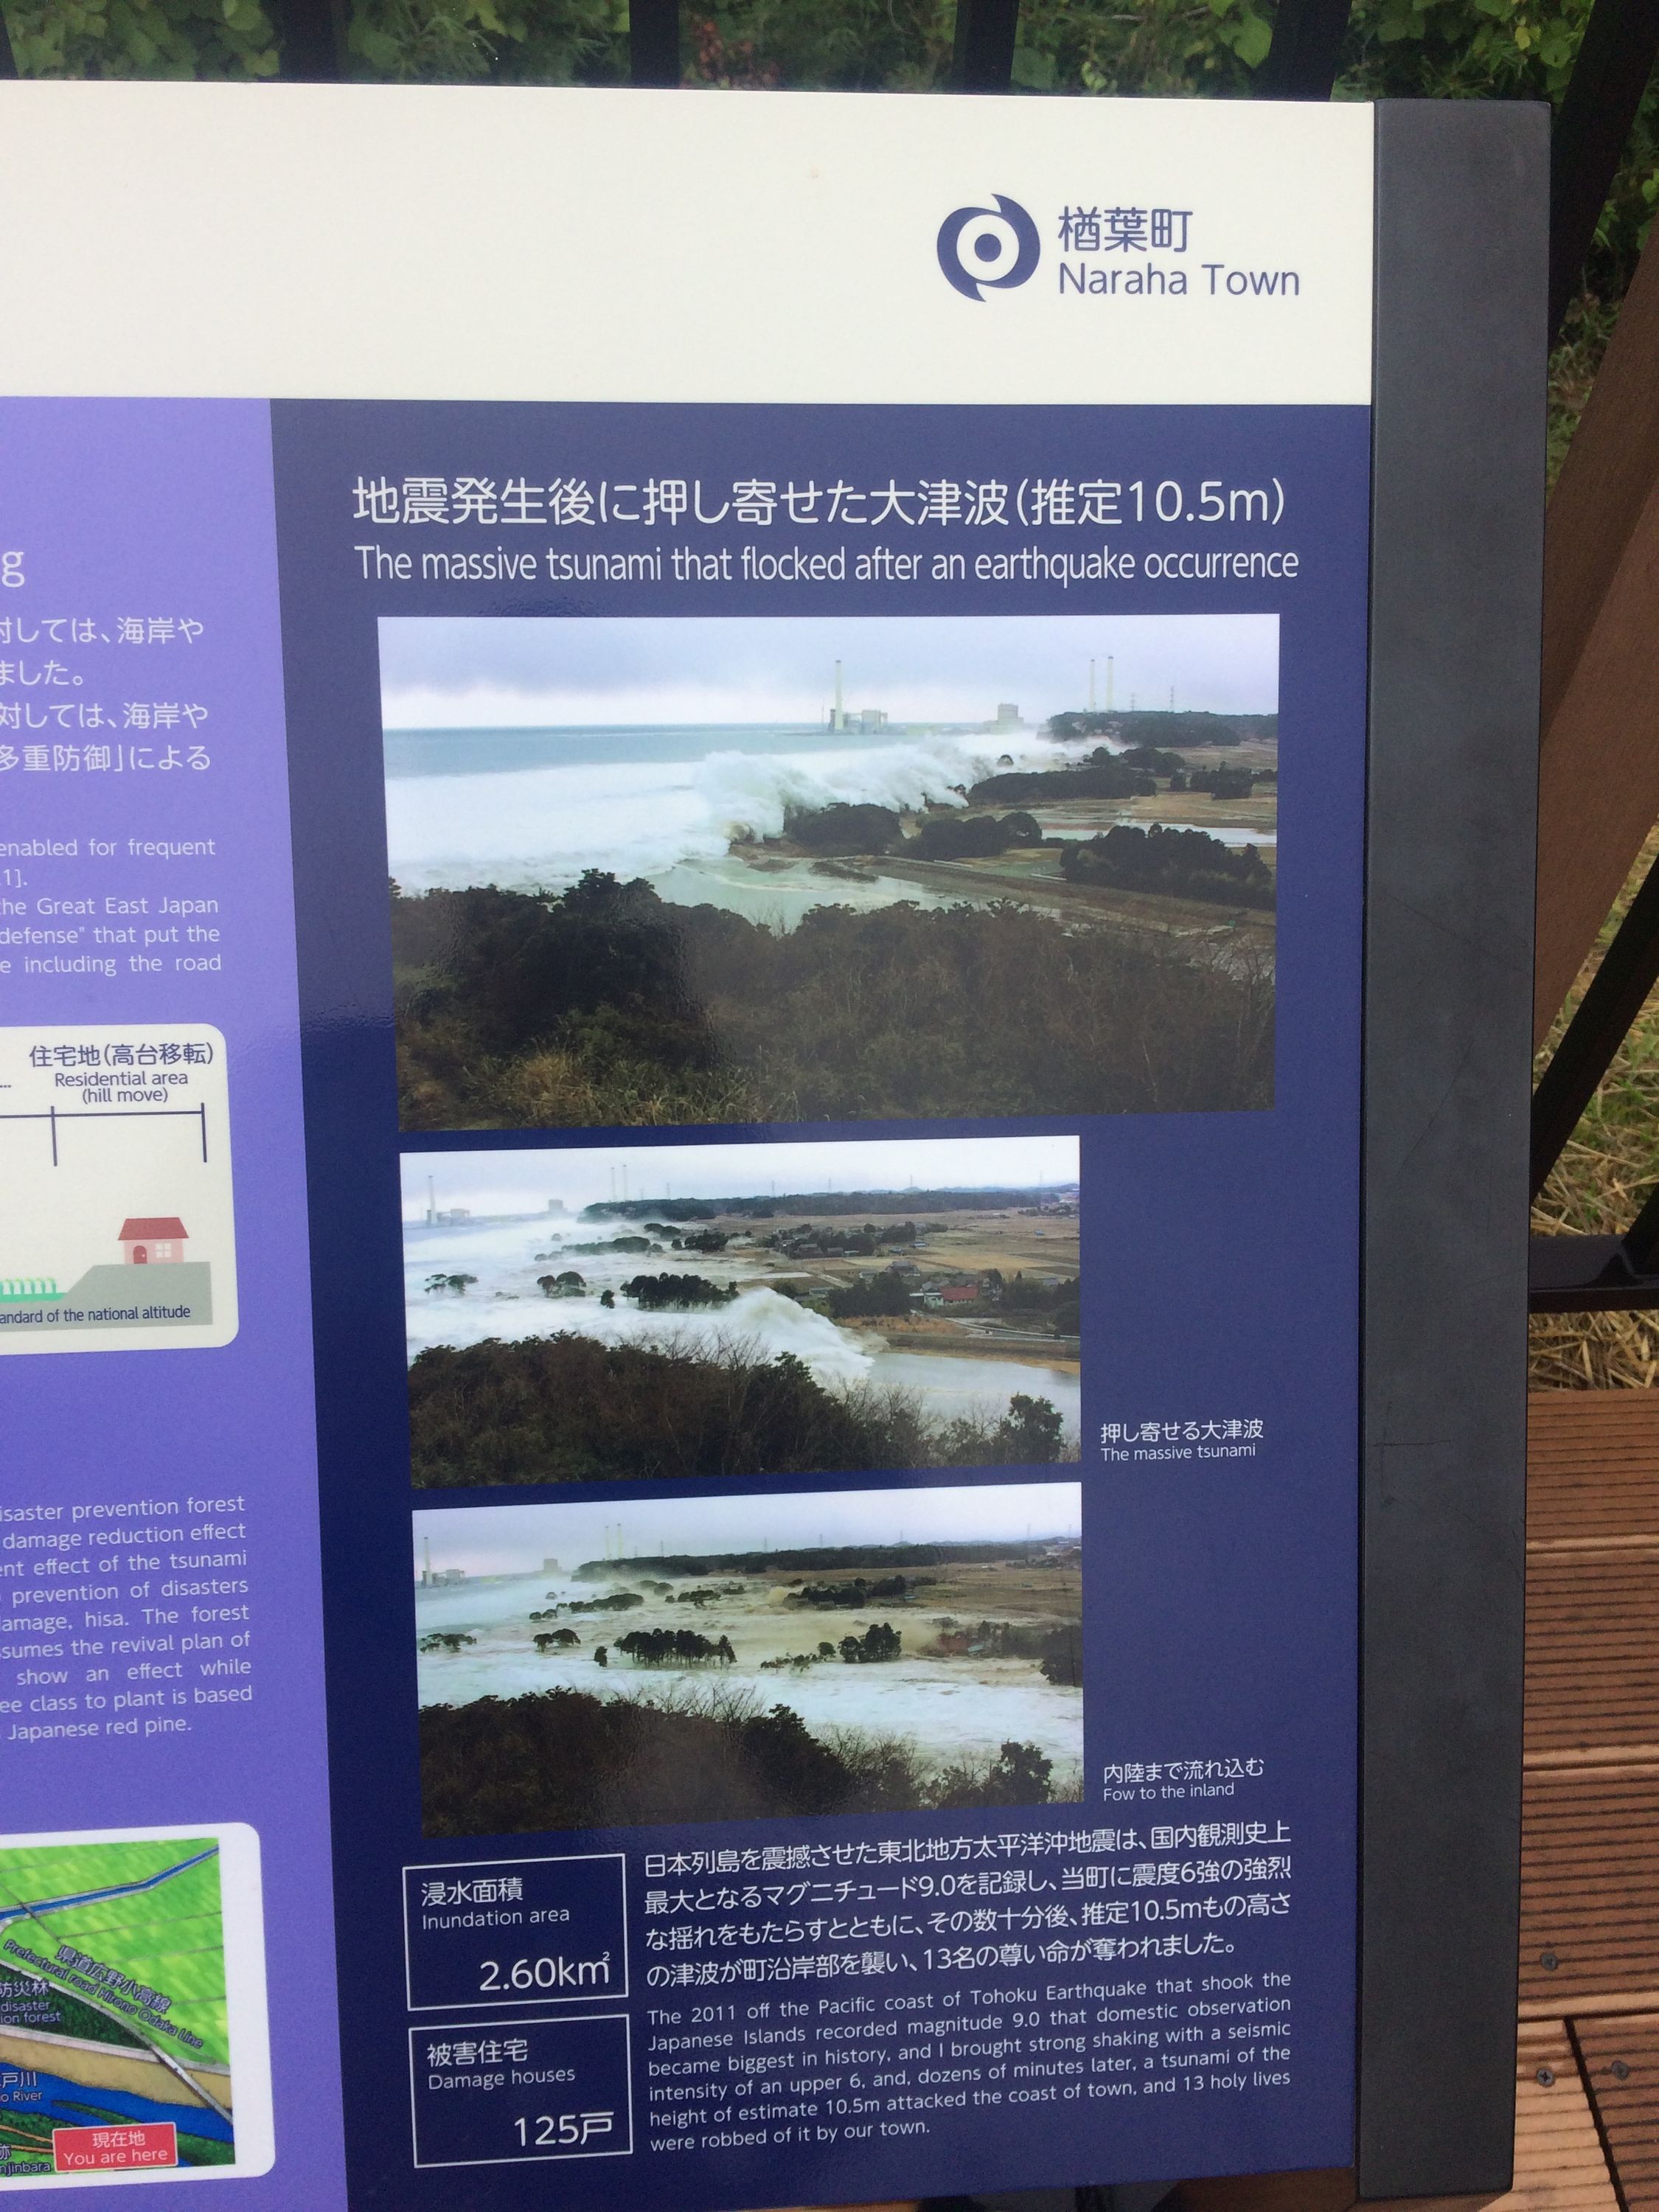 A sign shows three pictures of the tsunami hitting Naraha on March 11, 2011.